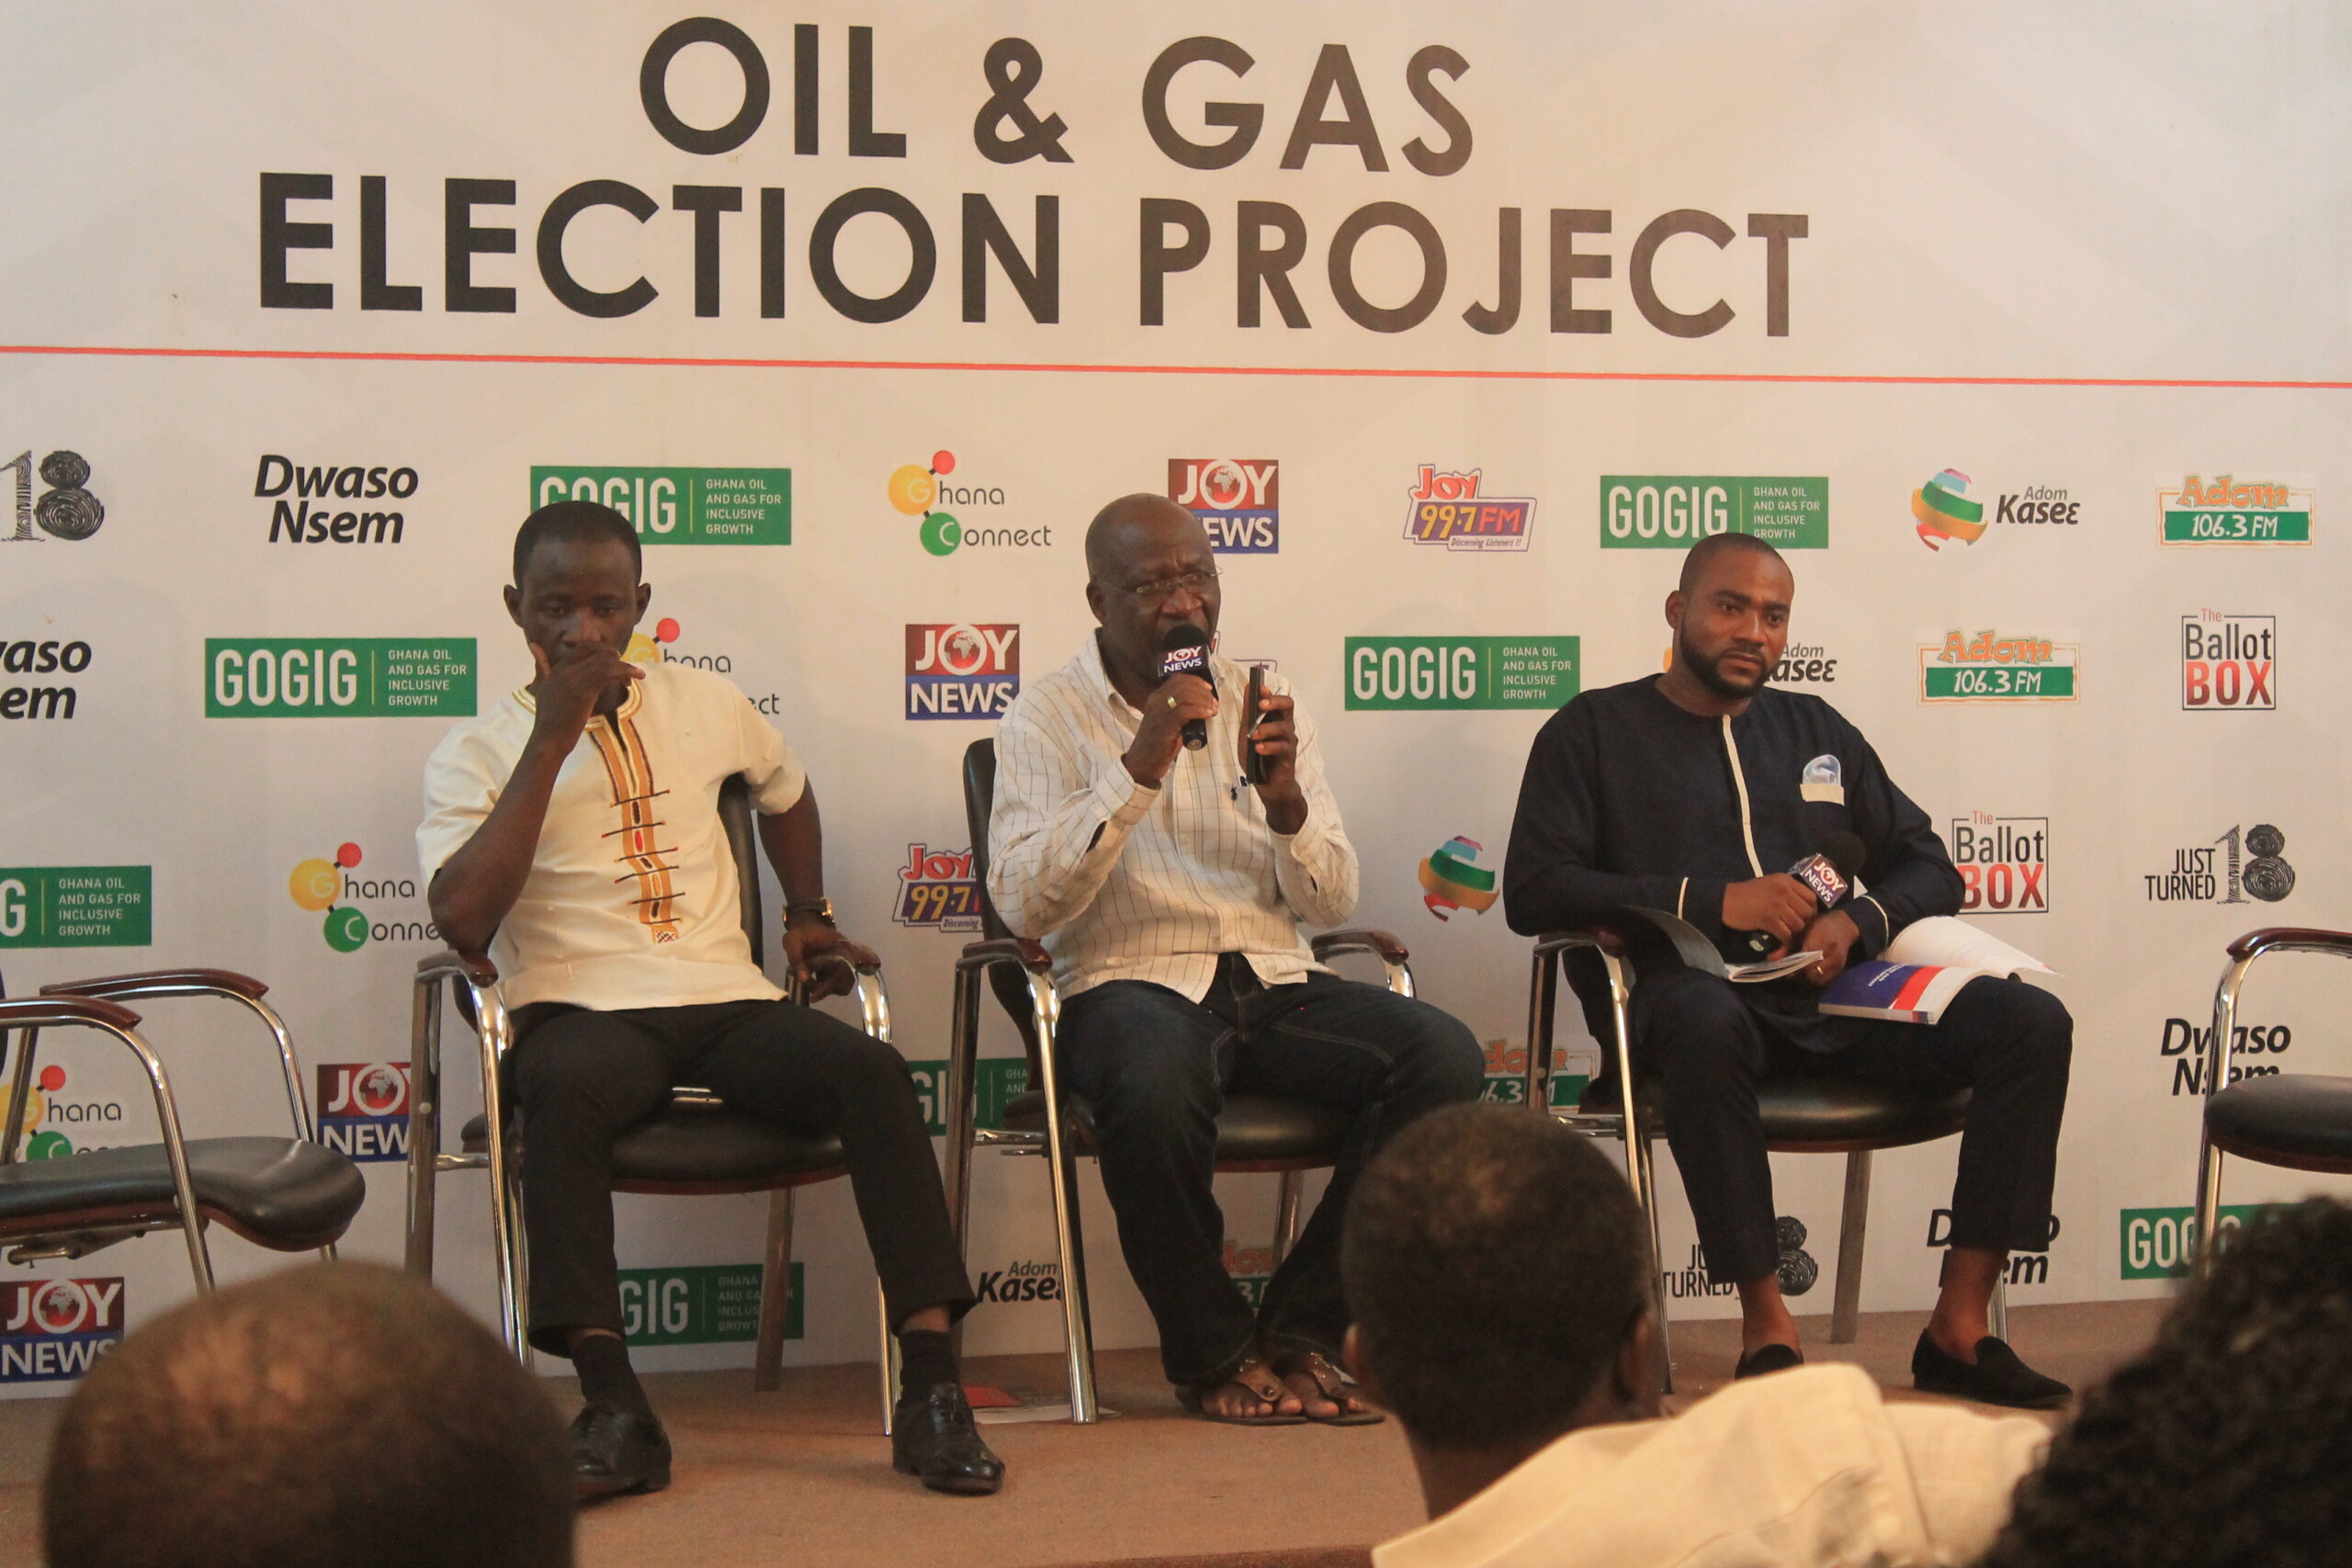 “Voters compass”: where do you stand as a citizen on oil and gas issues?